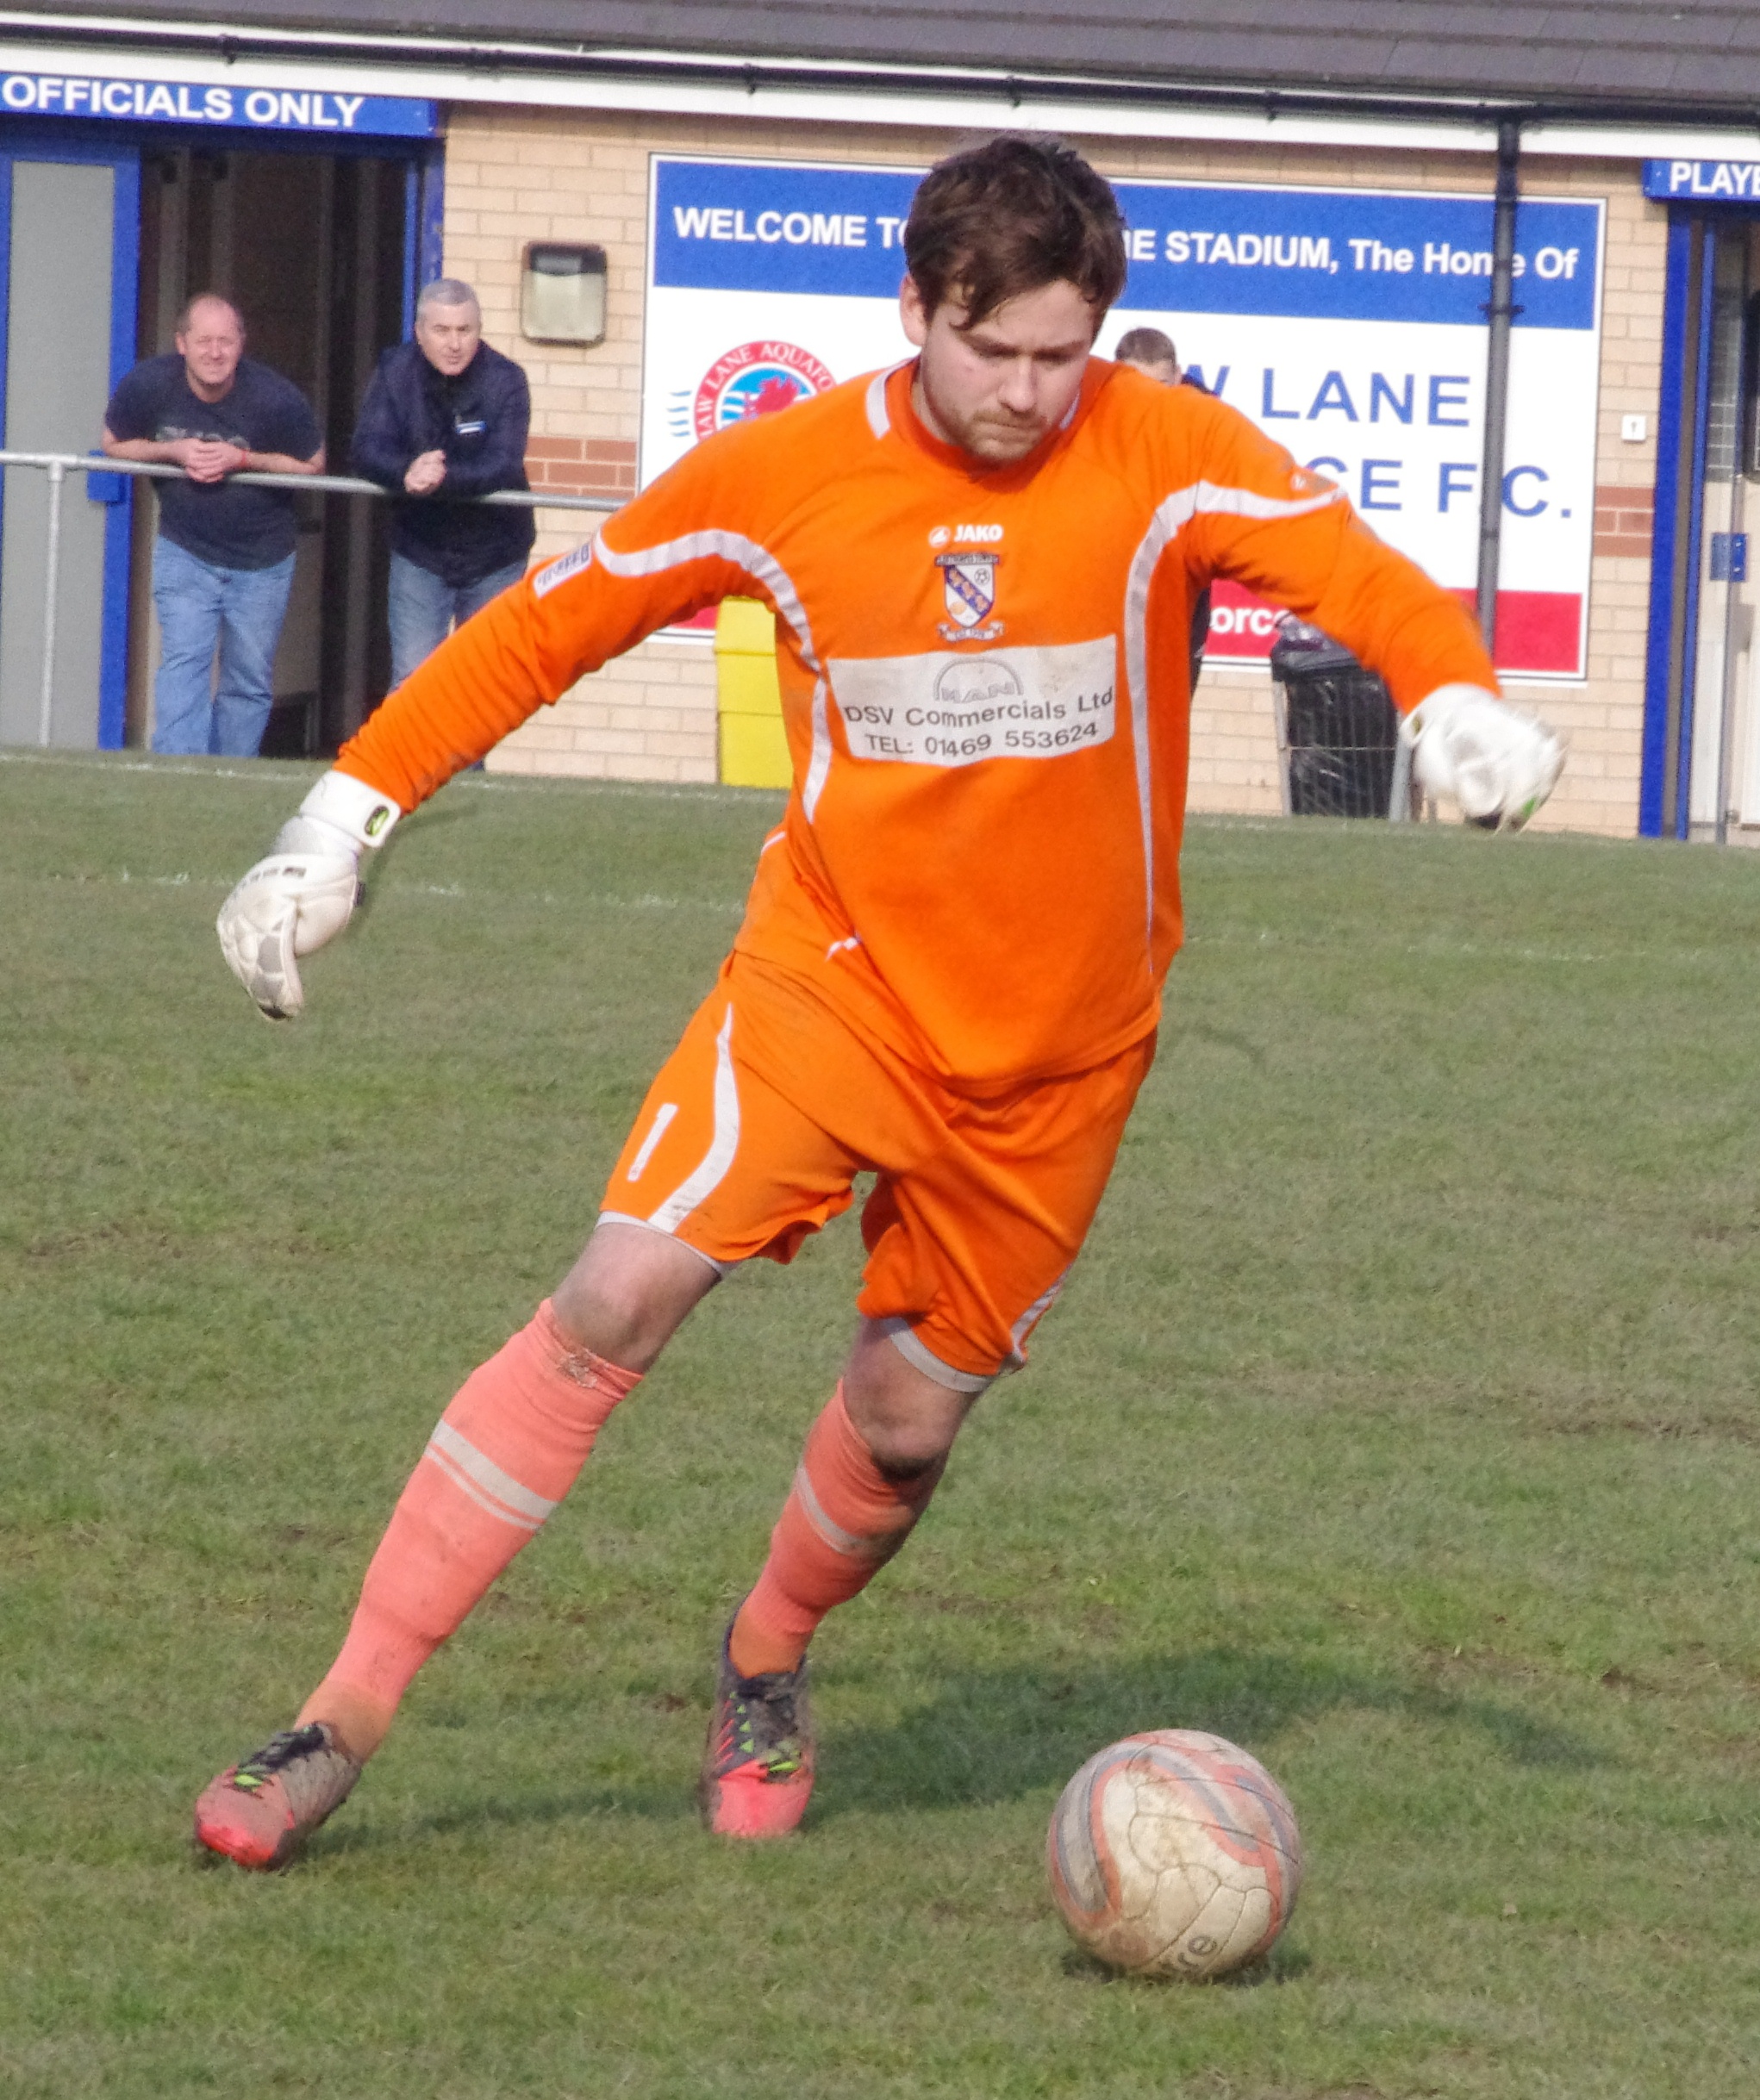 Cleethorpes Town goalkeeper Miles Fenty had the game of his life